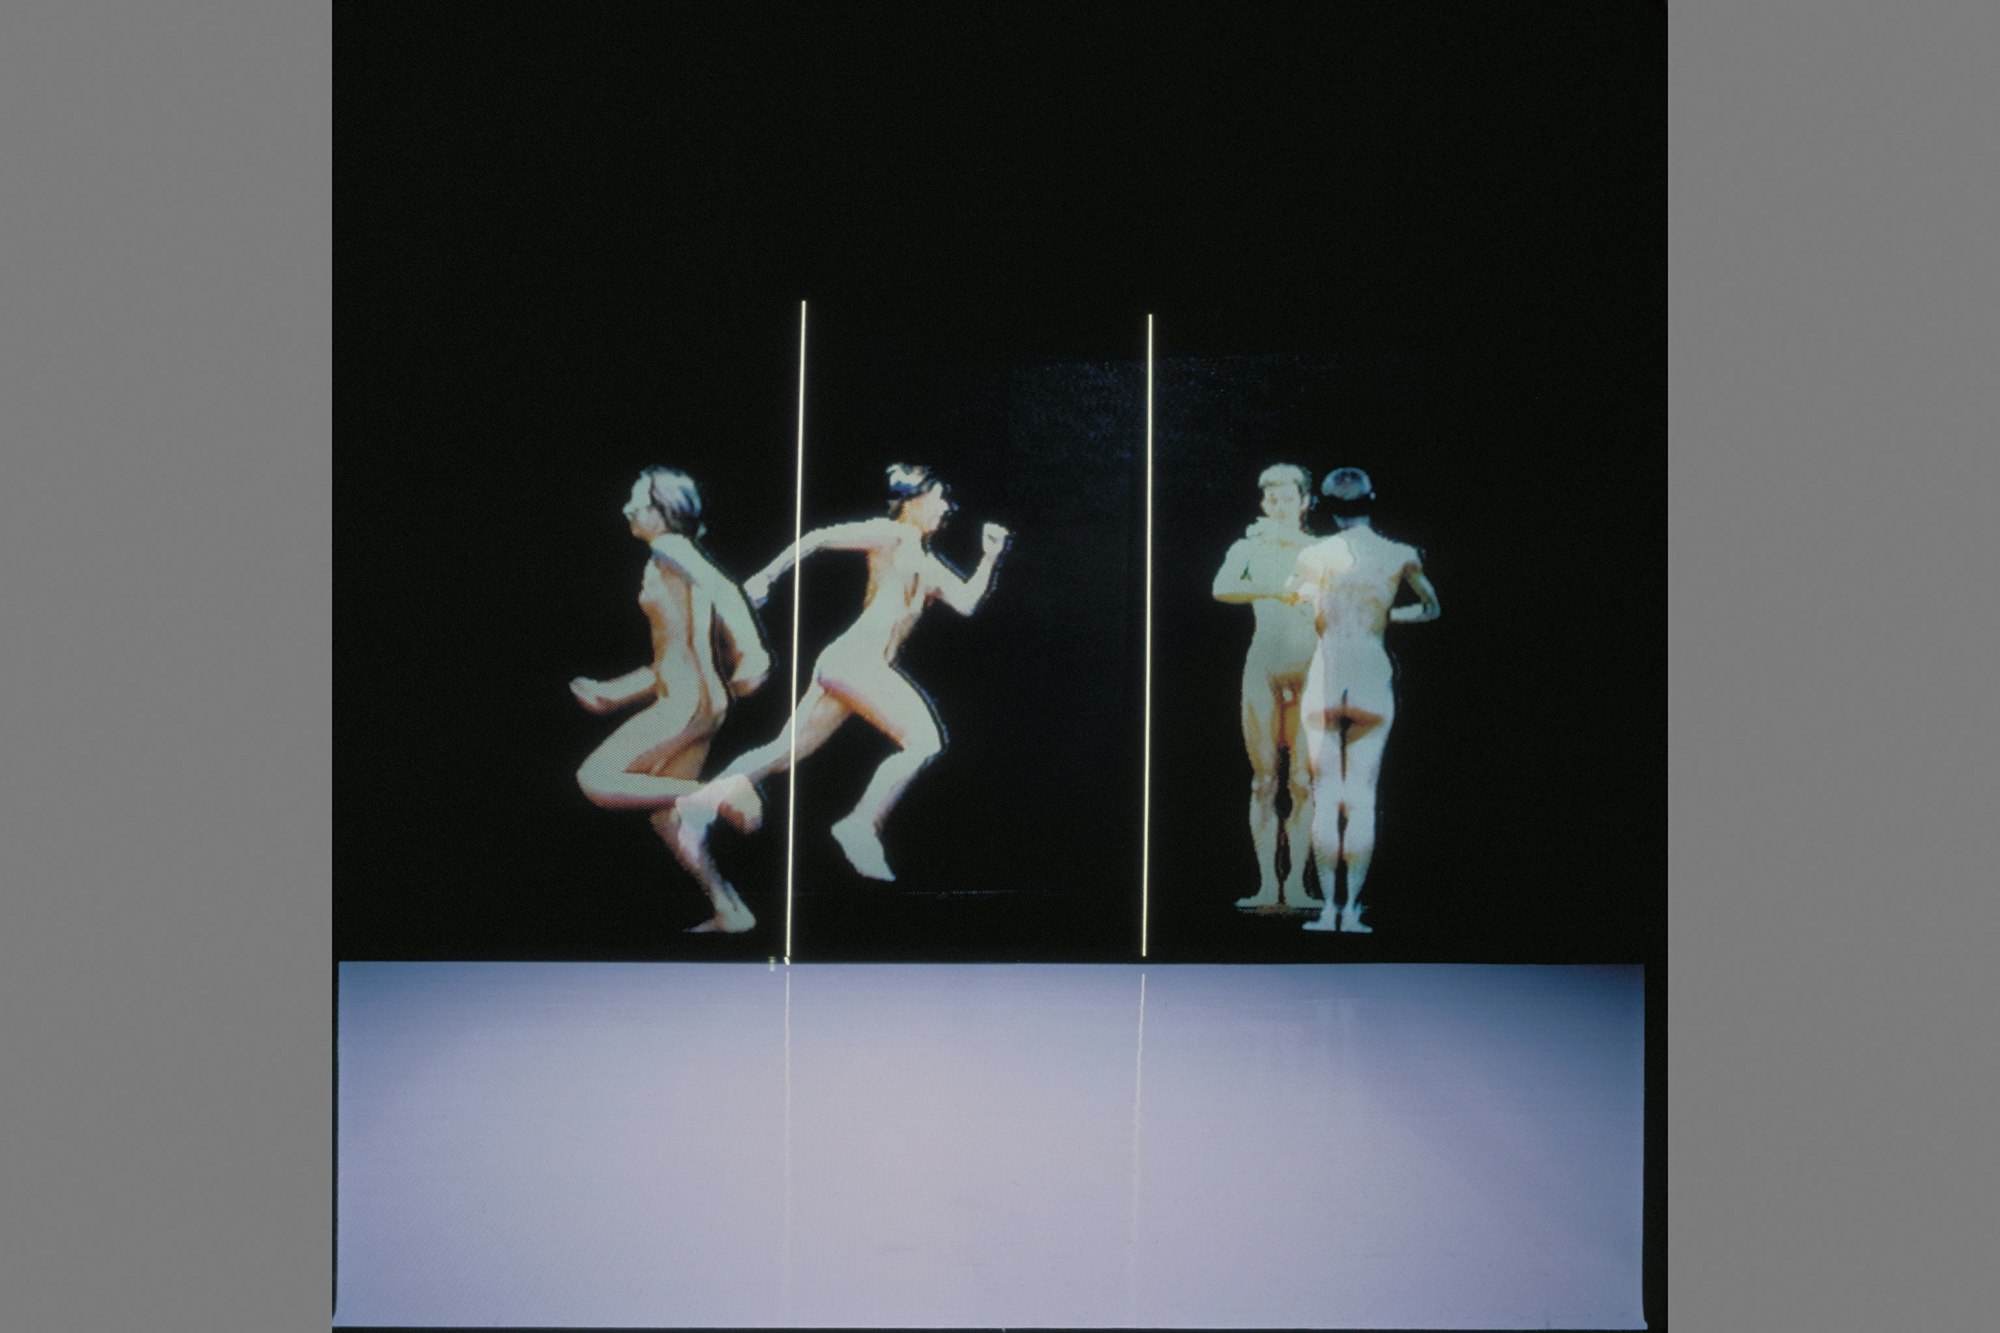 A still of four unclothed bodies: two running away from each other, two facing each other.